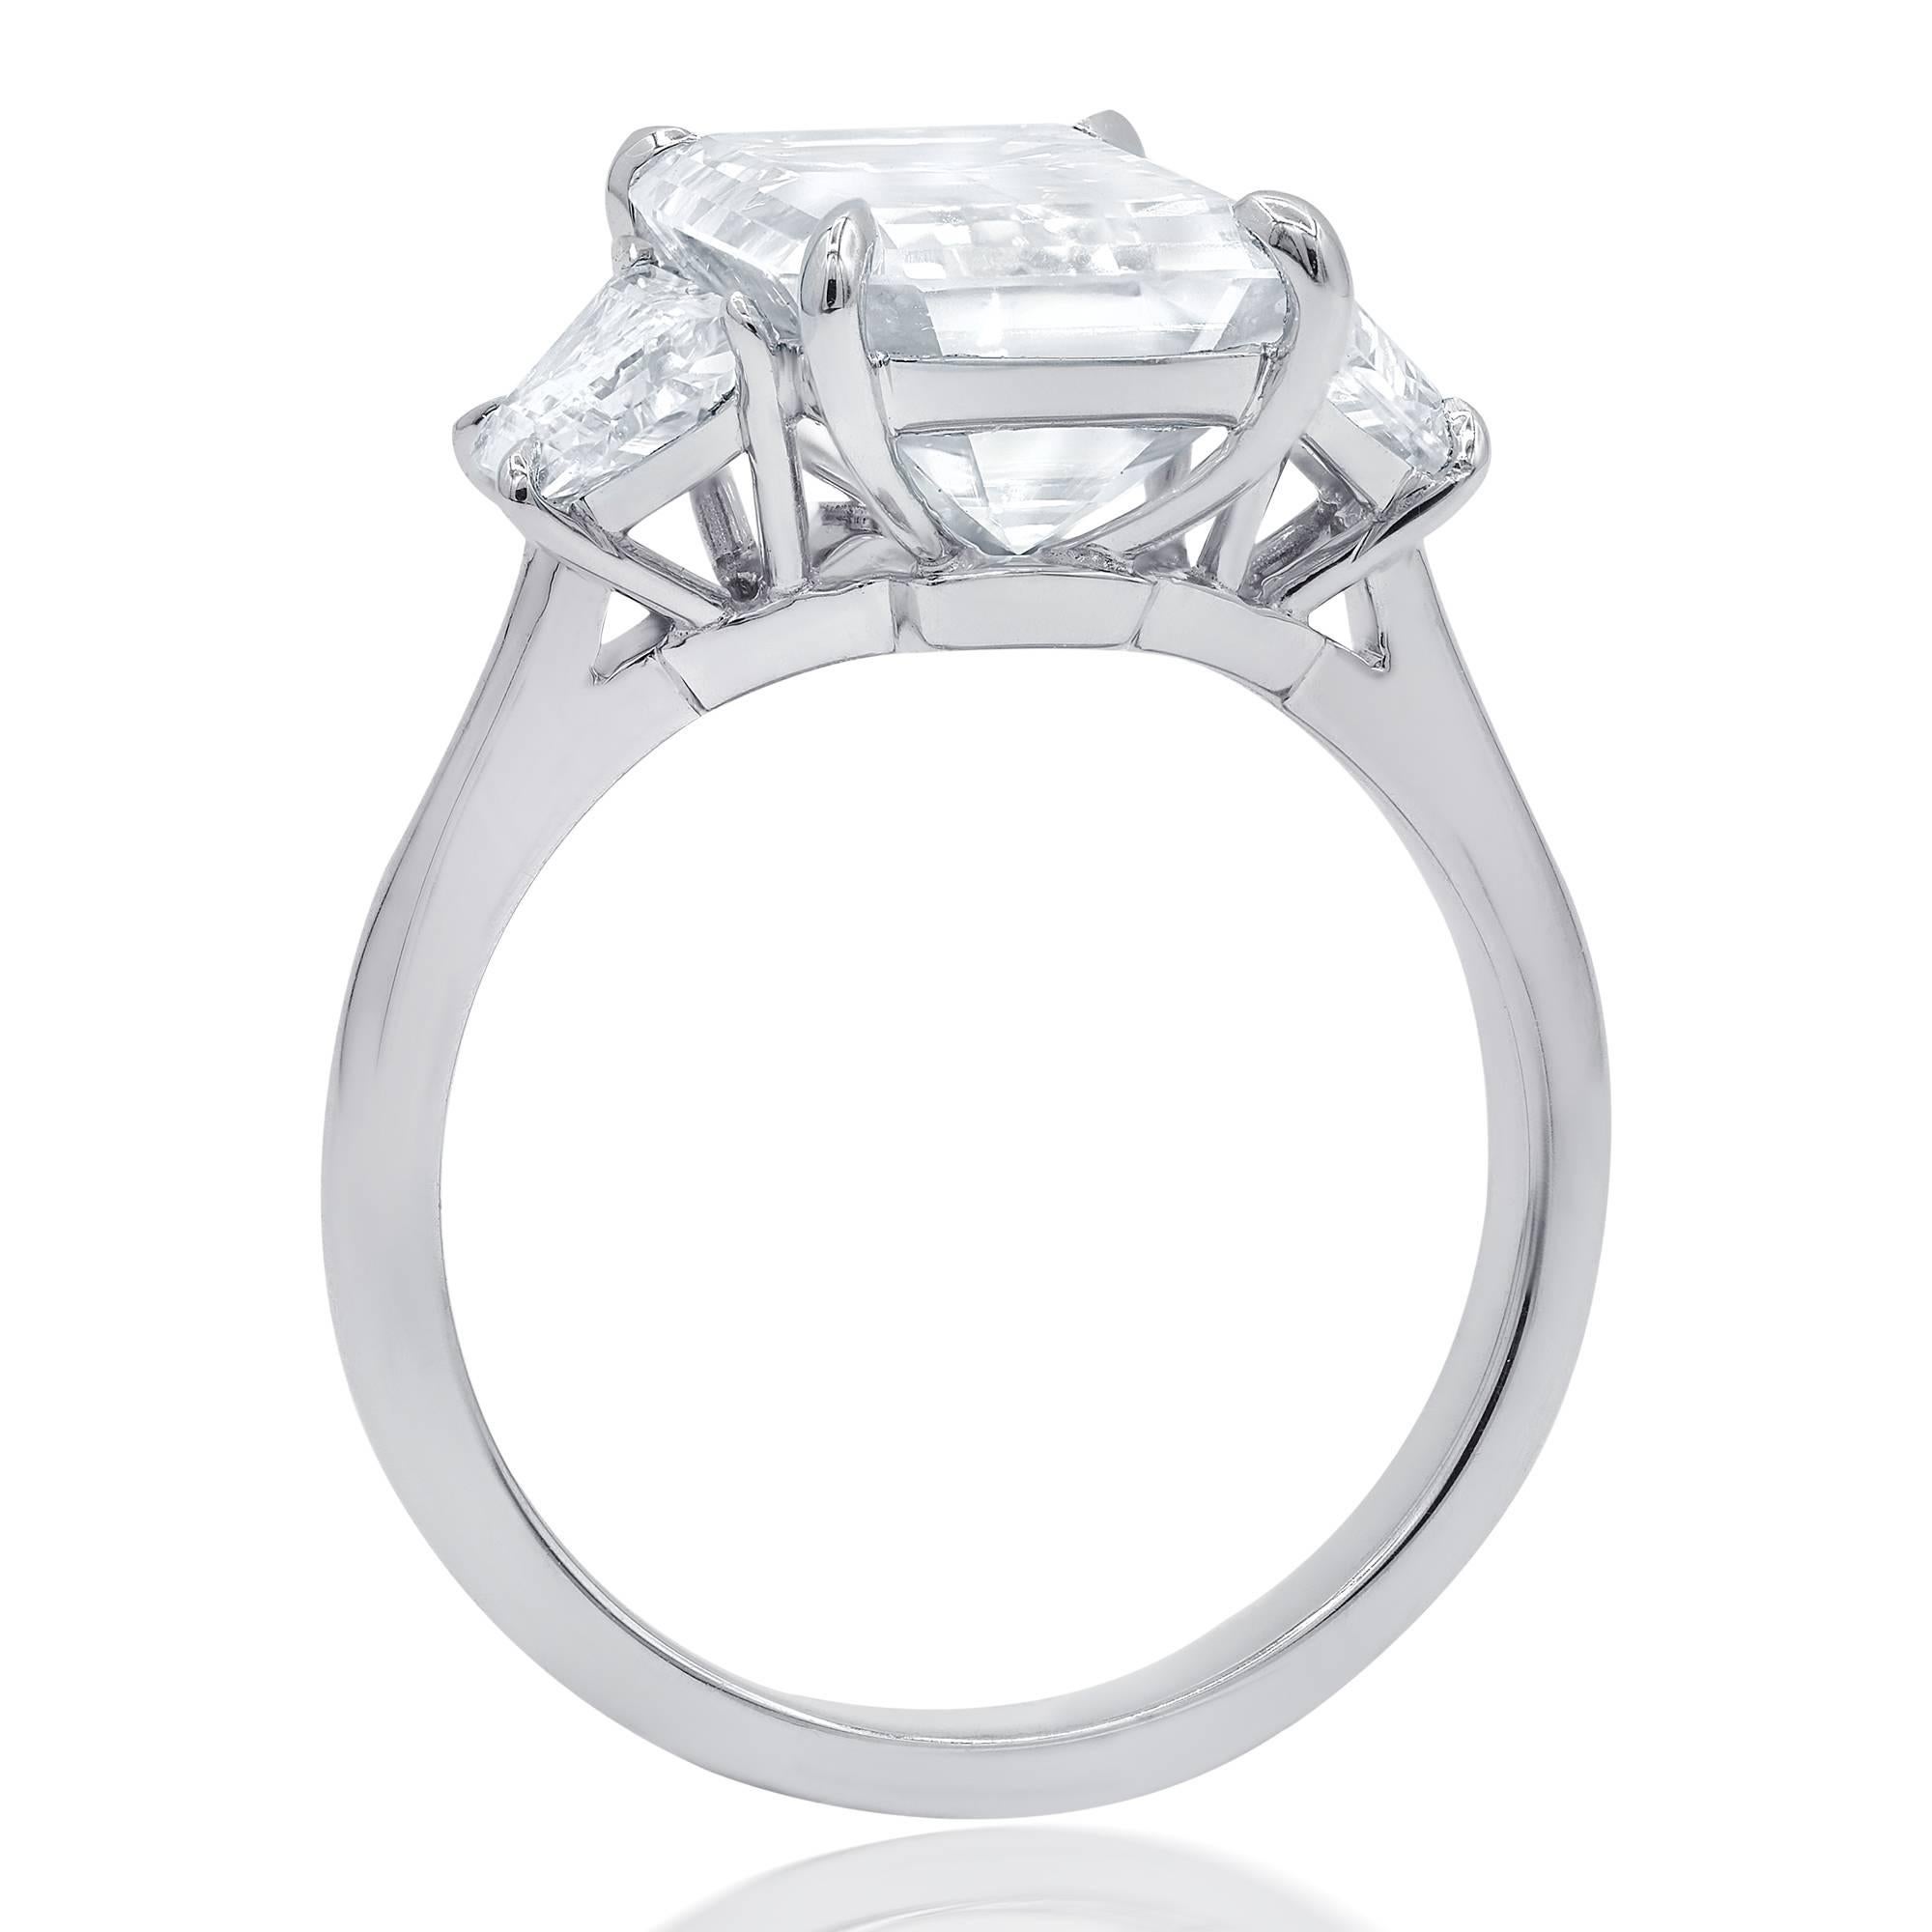 GIA certified diamond engagement ring with emerald cut diamond in the center,weighing 4.83 carat H color and VS1 clarity set in custom made platinum mounting with additional  0.90 carats total of  trapezoid diamonds on each side.